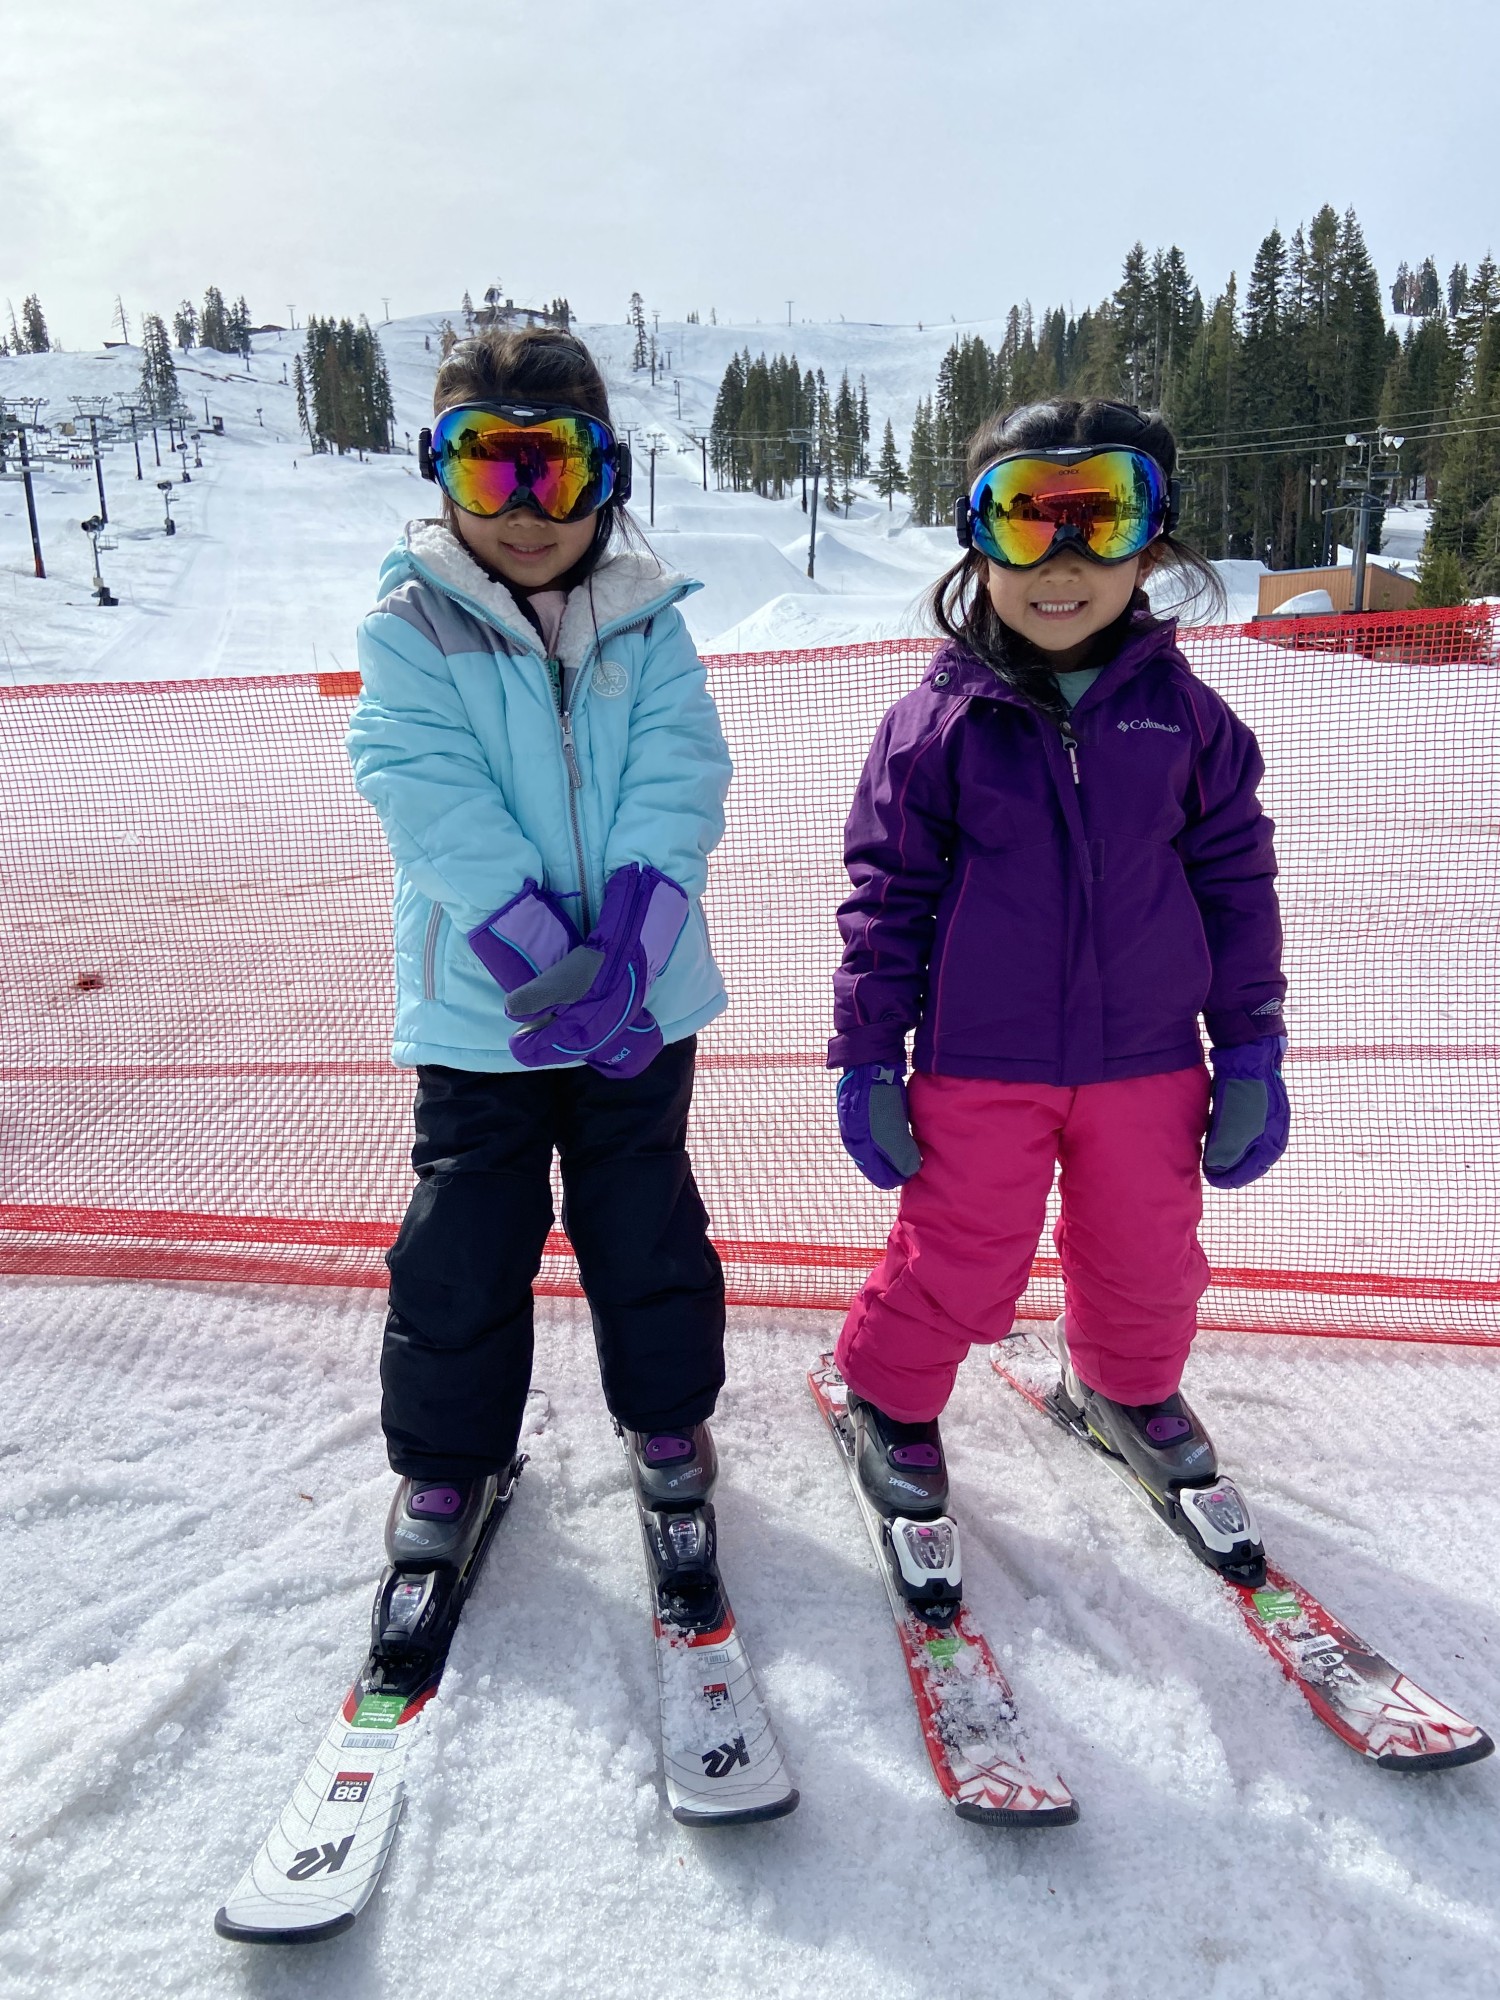 First time in our ski gear! We look good, despite humongous goggles.